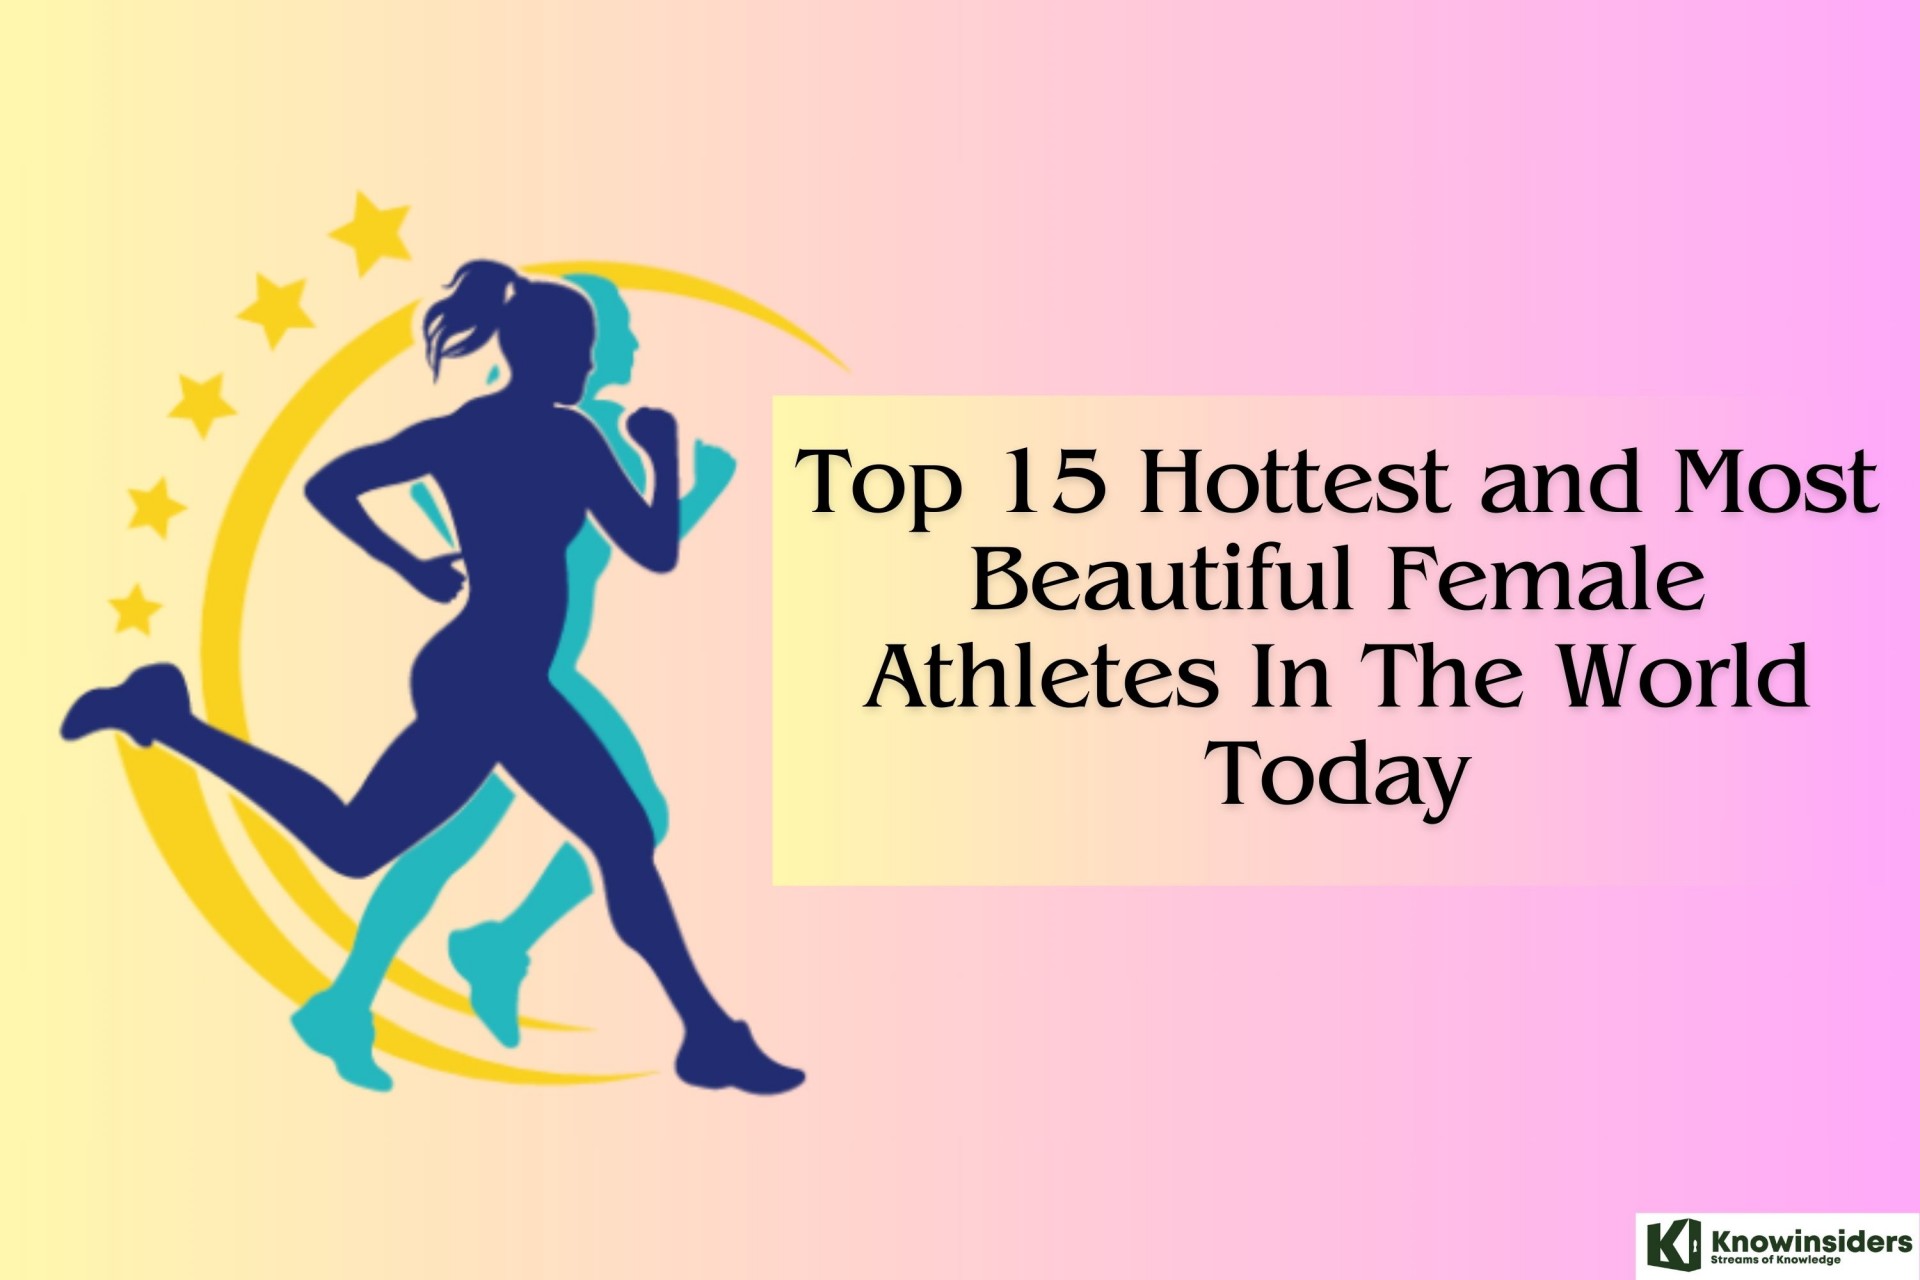 Top 15 Most Beautiful Female Athletes in the World Today